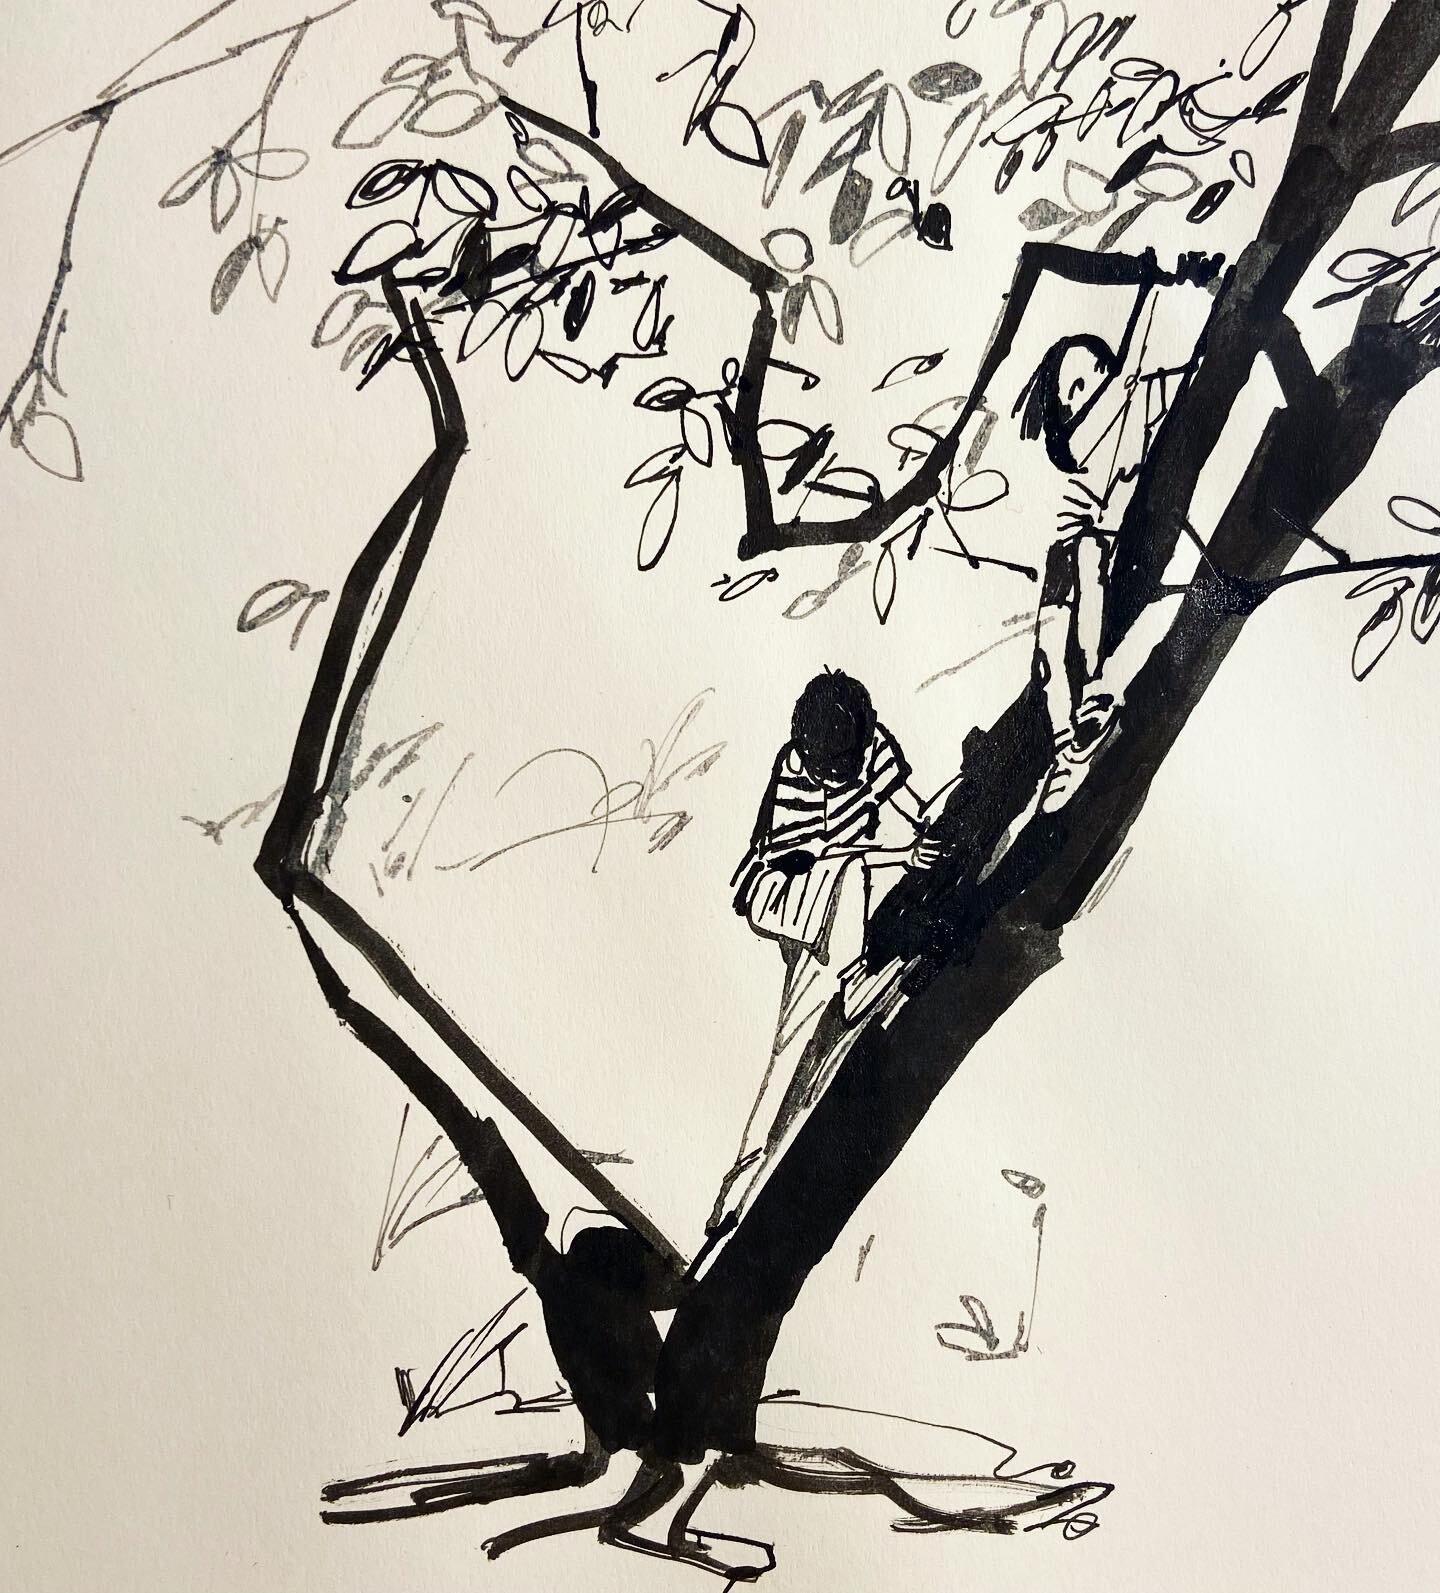 More kids in trees from the sketchbook&hellip; this one has a bit of an ominous vibe!
-
#ink #lmtsketchbook